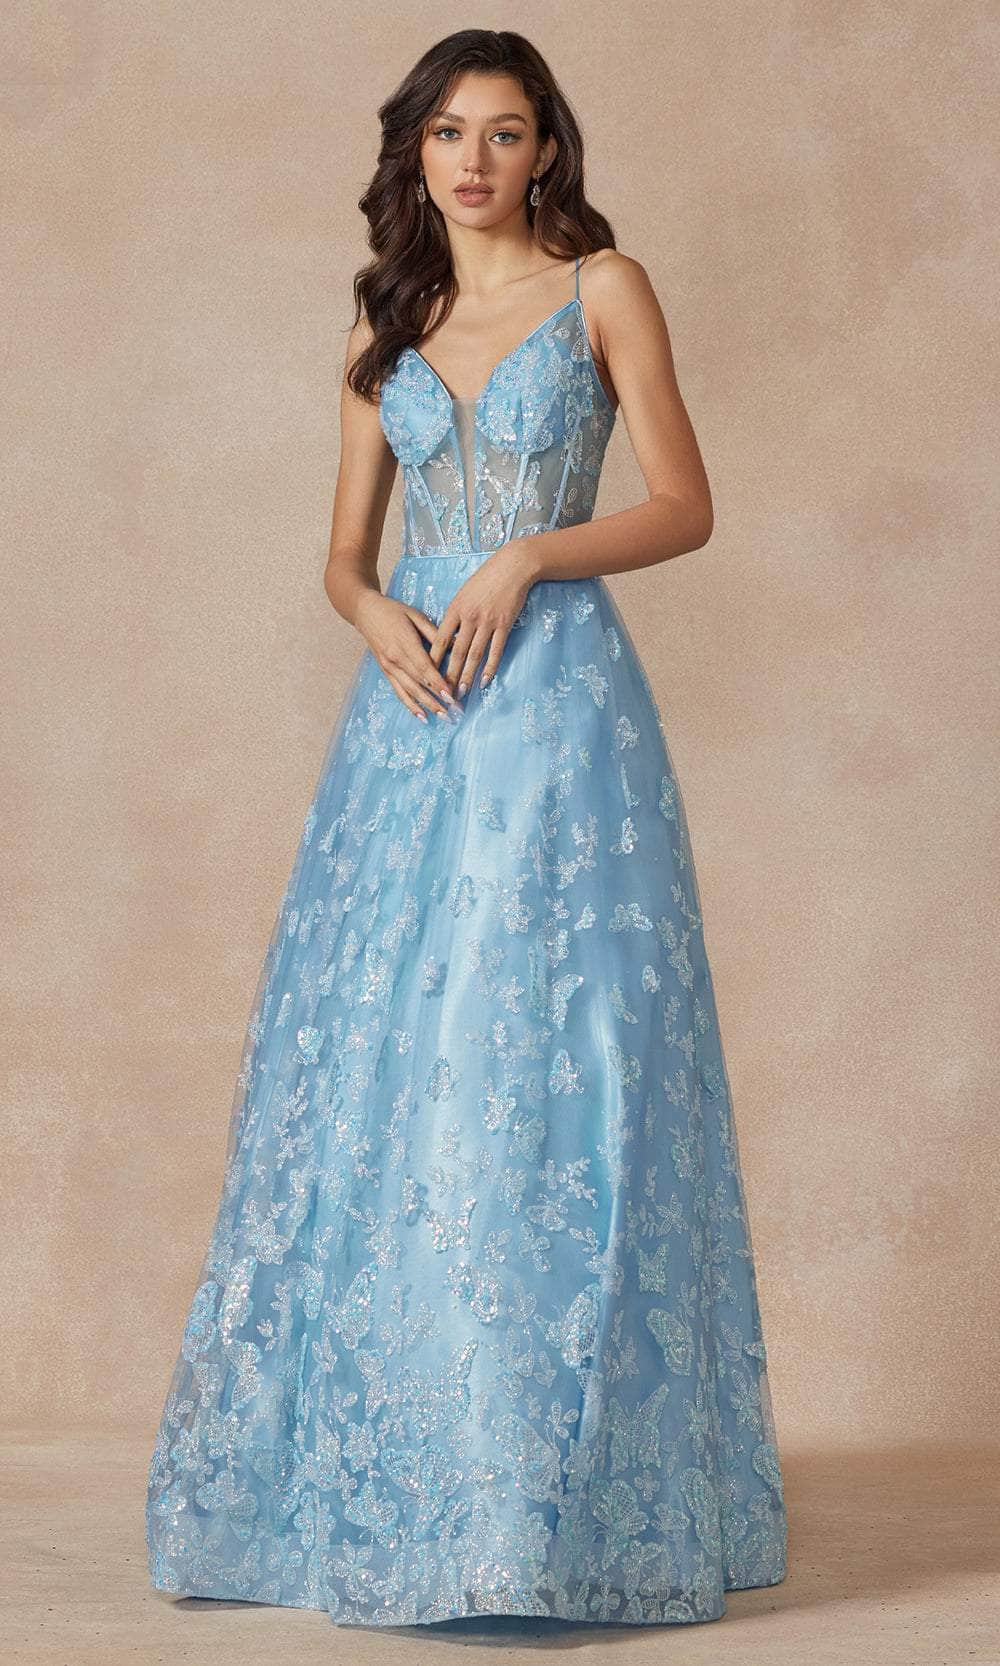 Juliet Dresses 2413 - Sleeveless Butterfly Glitter Embroidered gown
